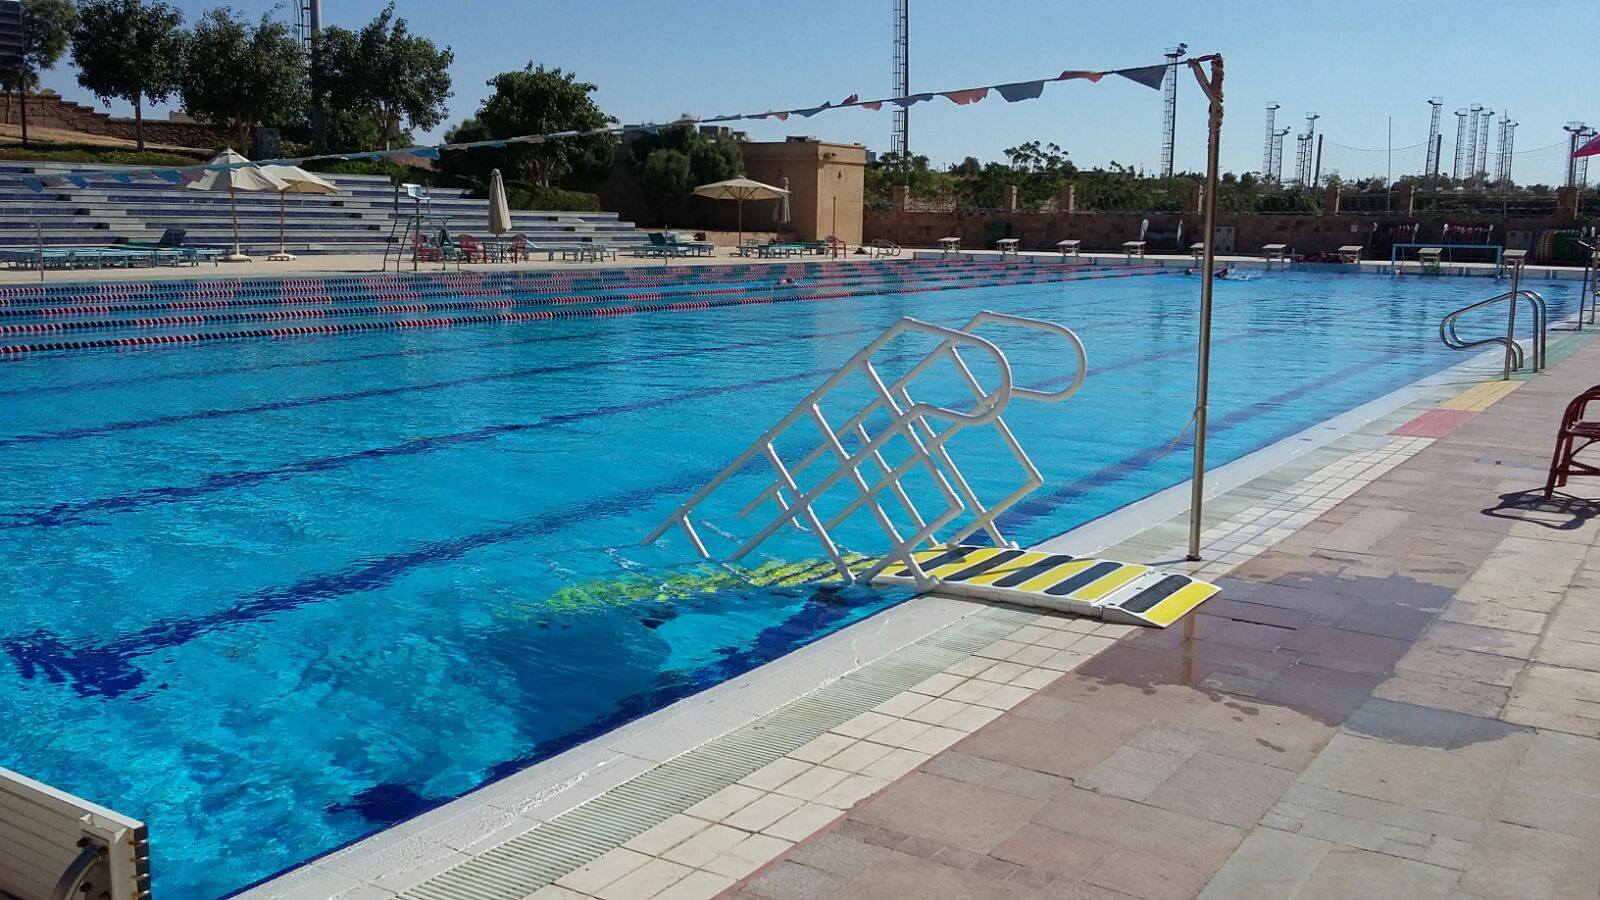 The new staircase at AUC's swimming pool will increase access to the University's facilities